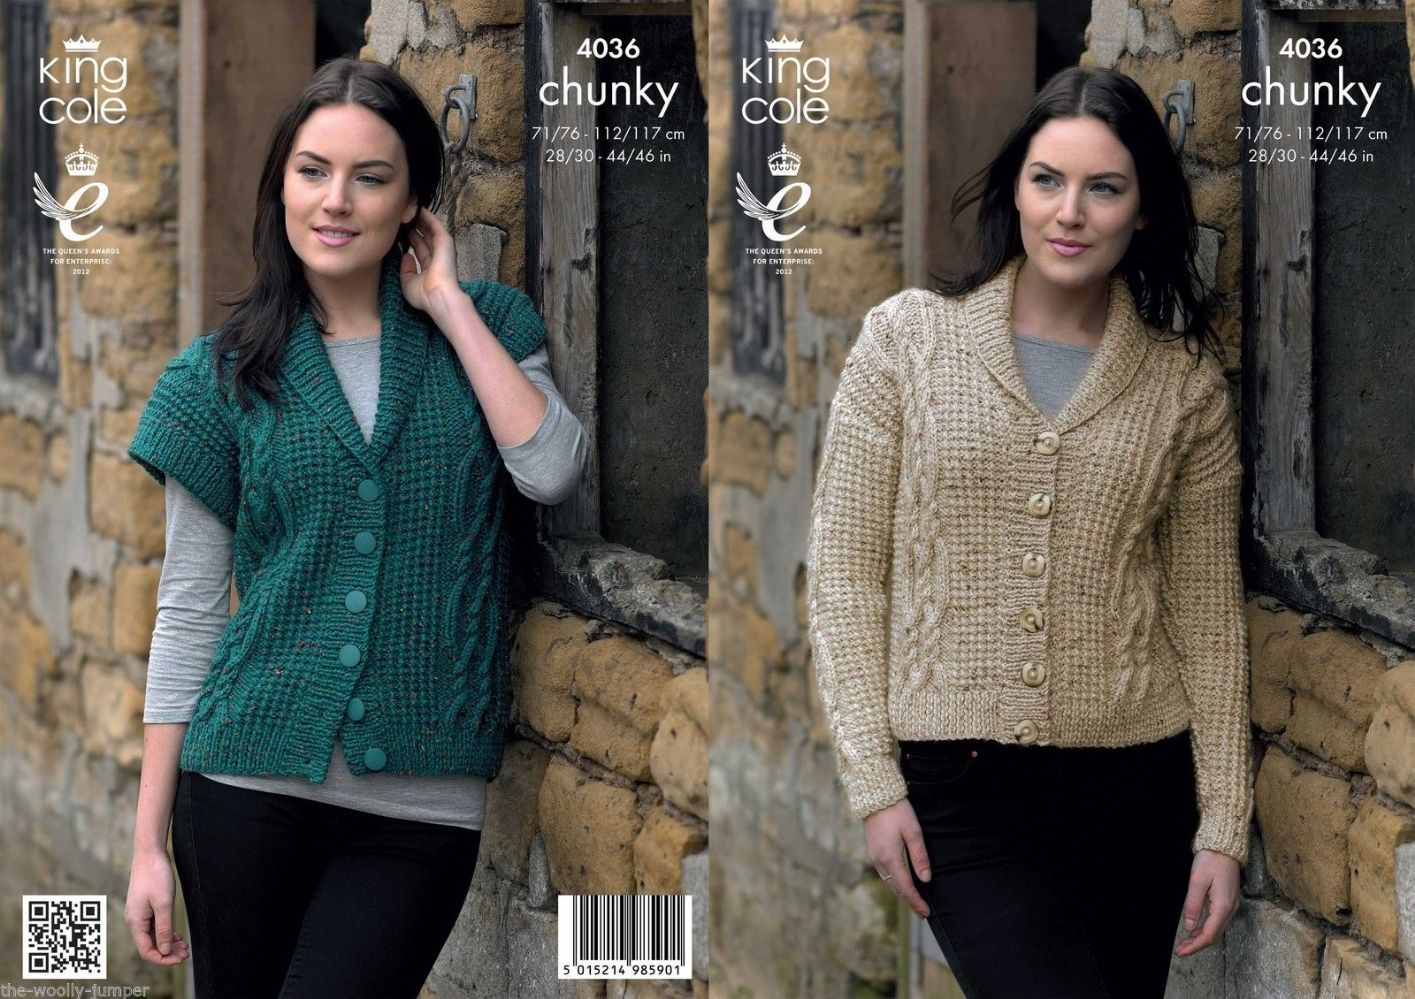 Tweed Knitting Patterns 4036 King Cole Chunky Tweed Cardigan Jacket Waistcoat Knitting Pattern To Chest 28 To 46